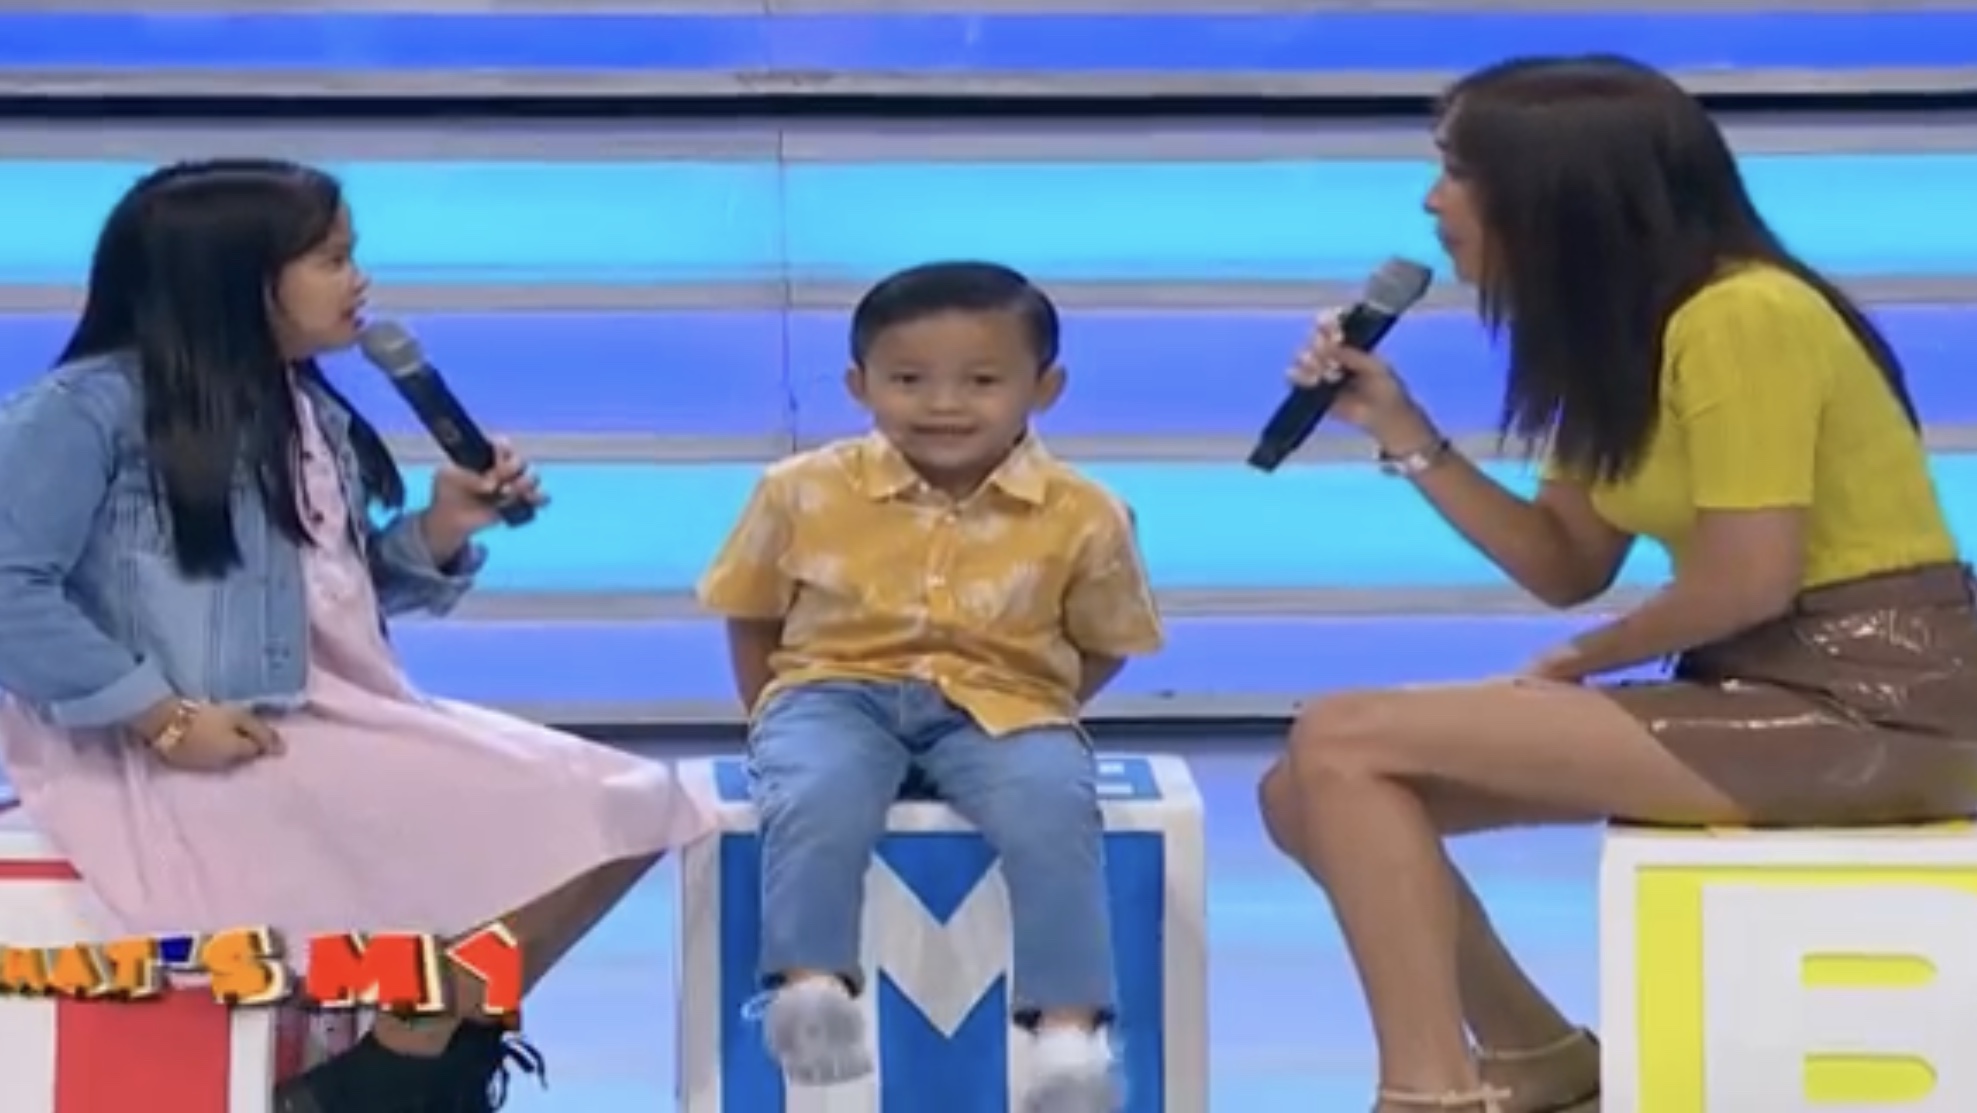 'That's My Boy' contestant wants to defend PH seas from China - The ...